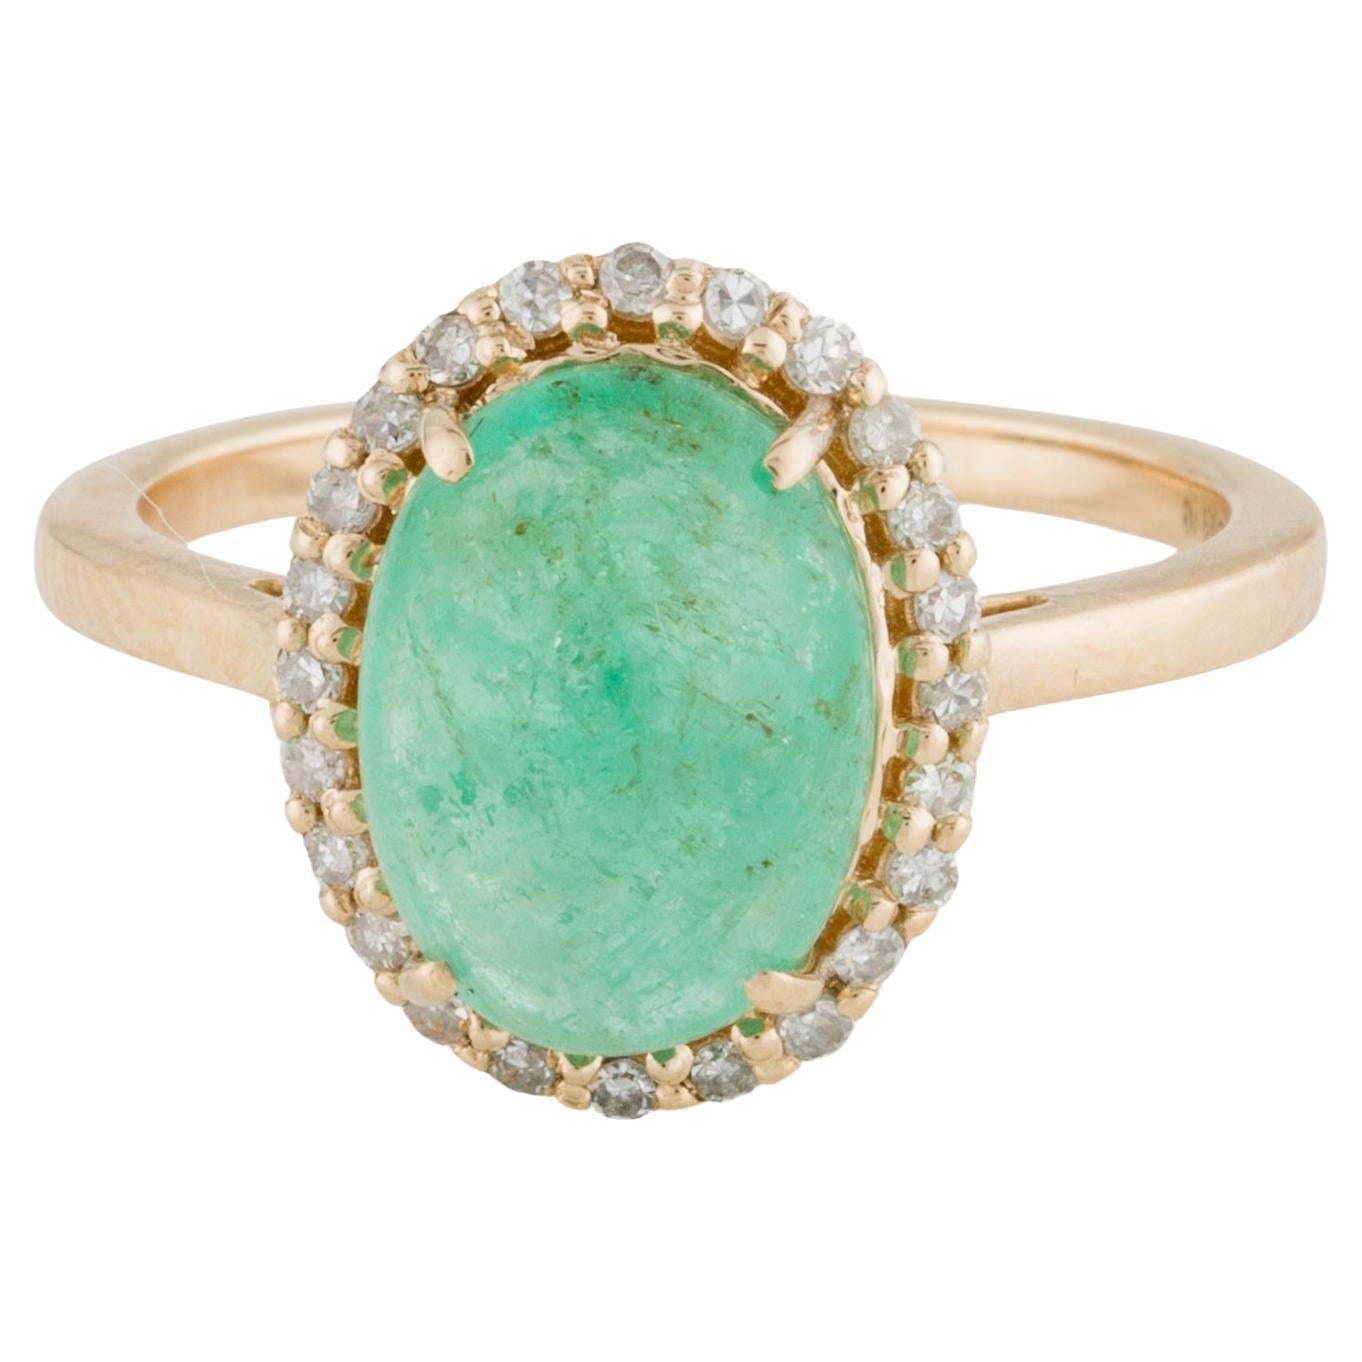 Luxurious 14K Emerald & Diamond Cocktail Ring - 3.59ct Gemstone - Size 6.75 For Sale